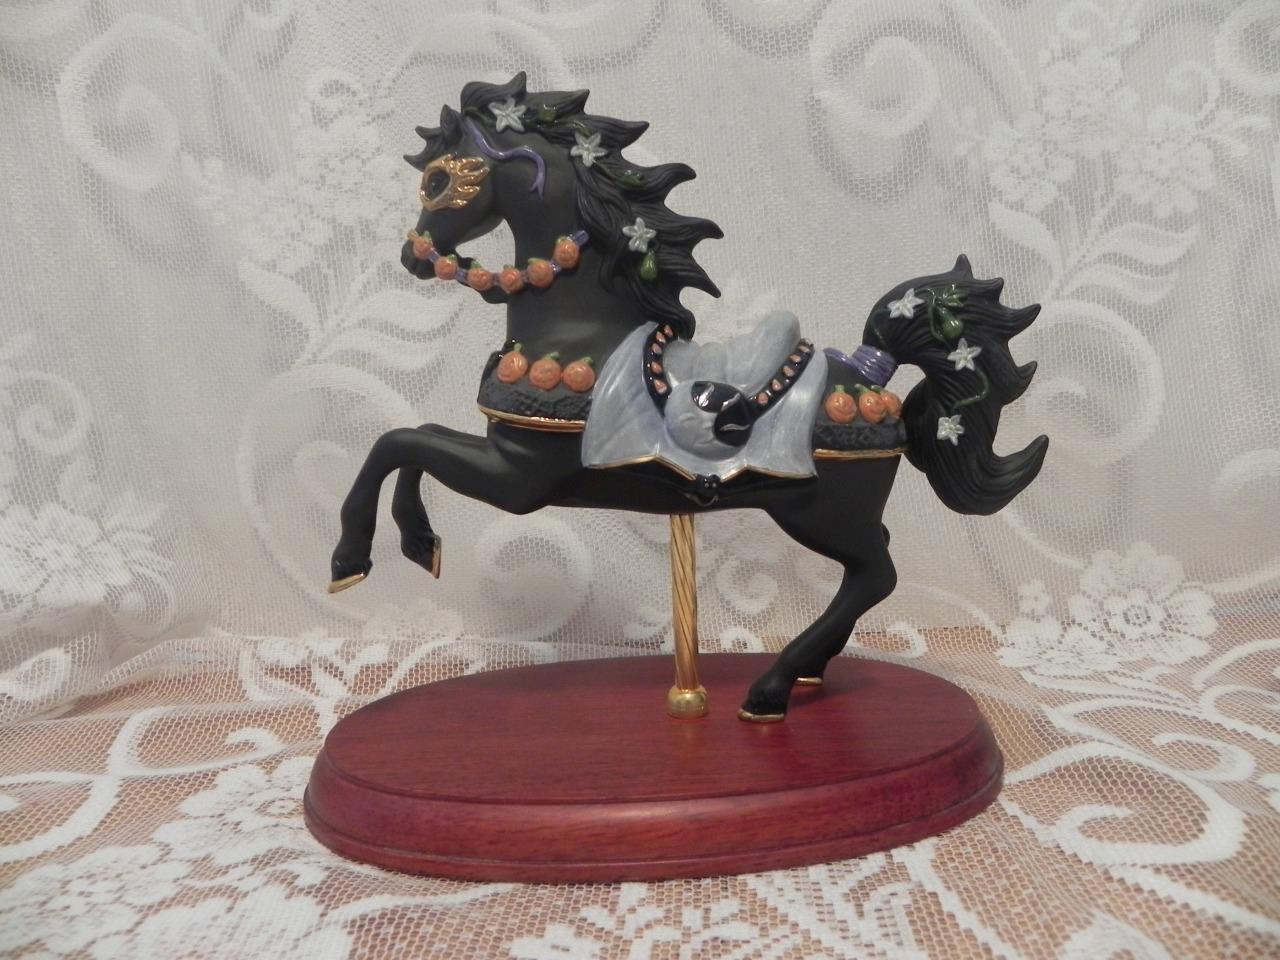 Lenox Halloween Carousel 2000 Limited Edition - Excellent Condition.